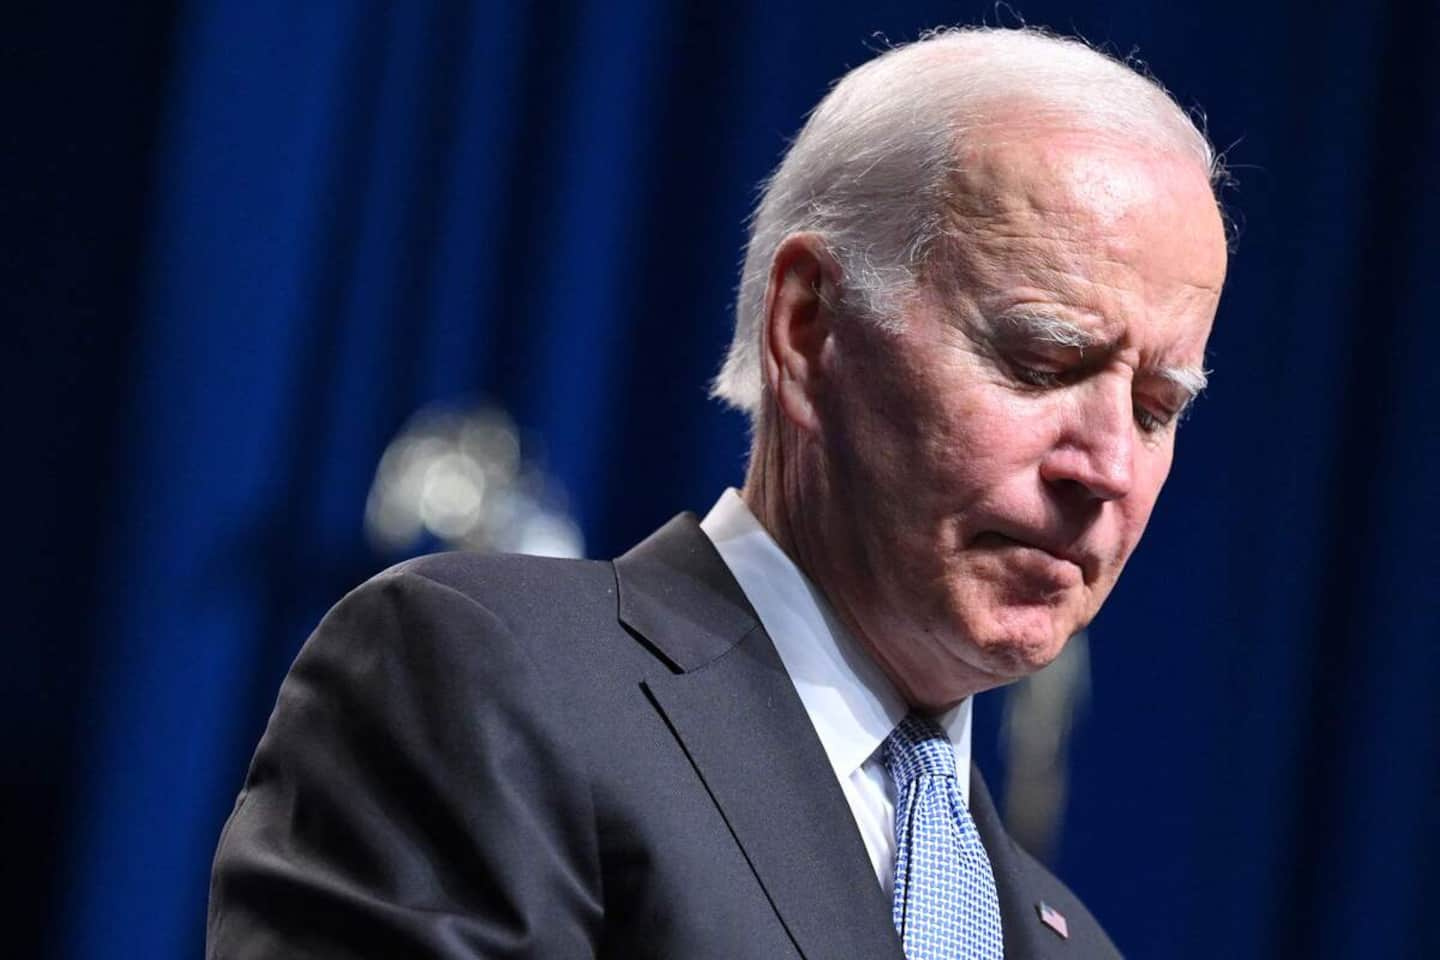 Deadly stampede: Biden 'stands with South Korea'